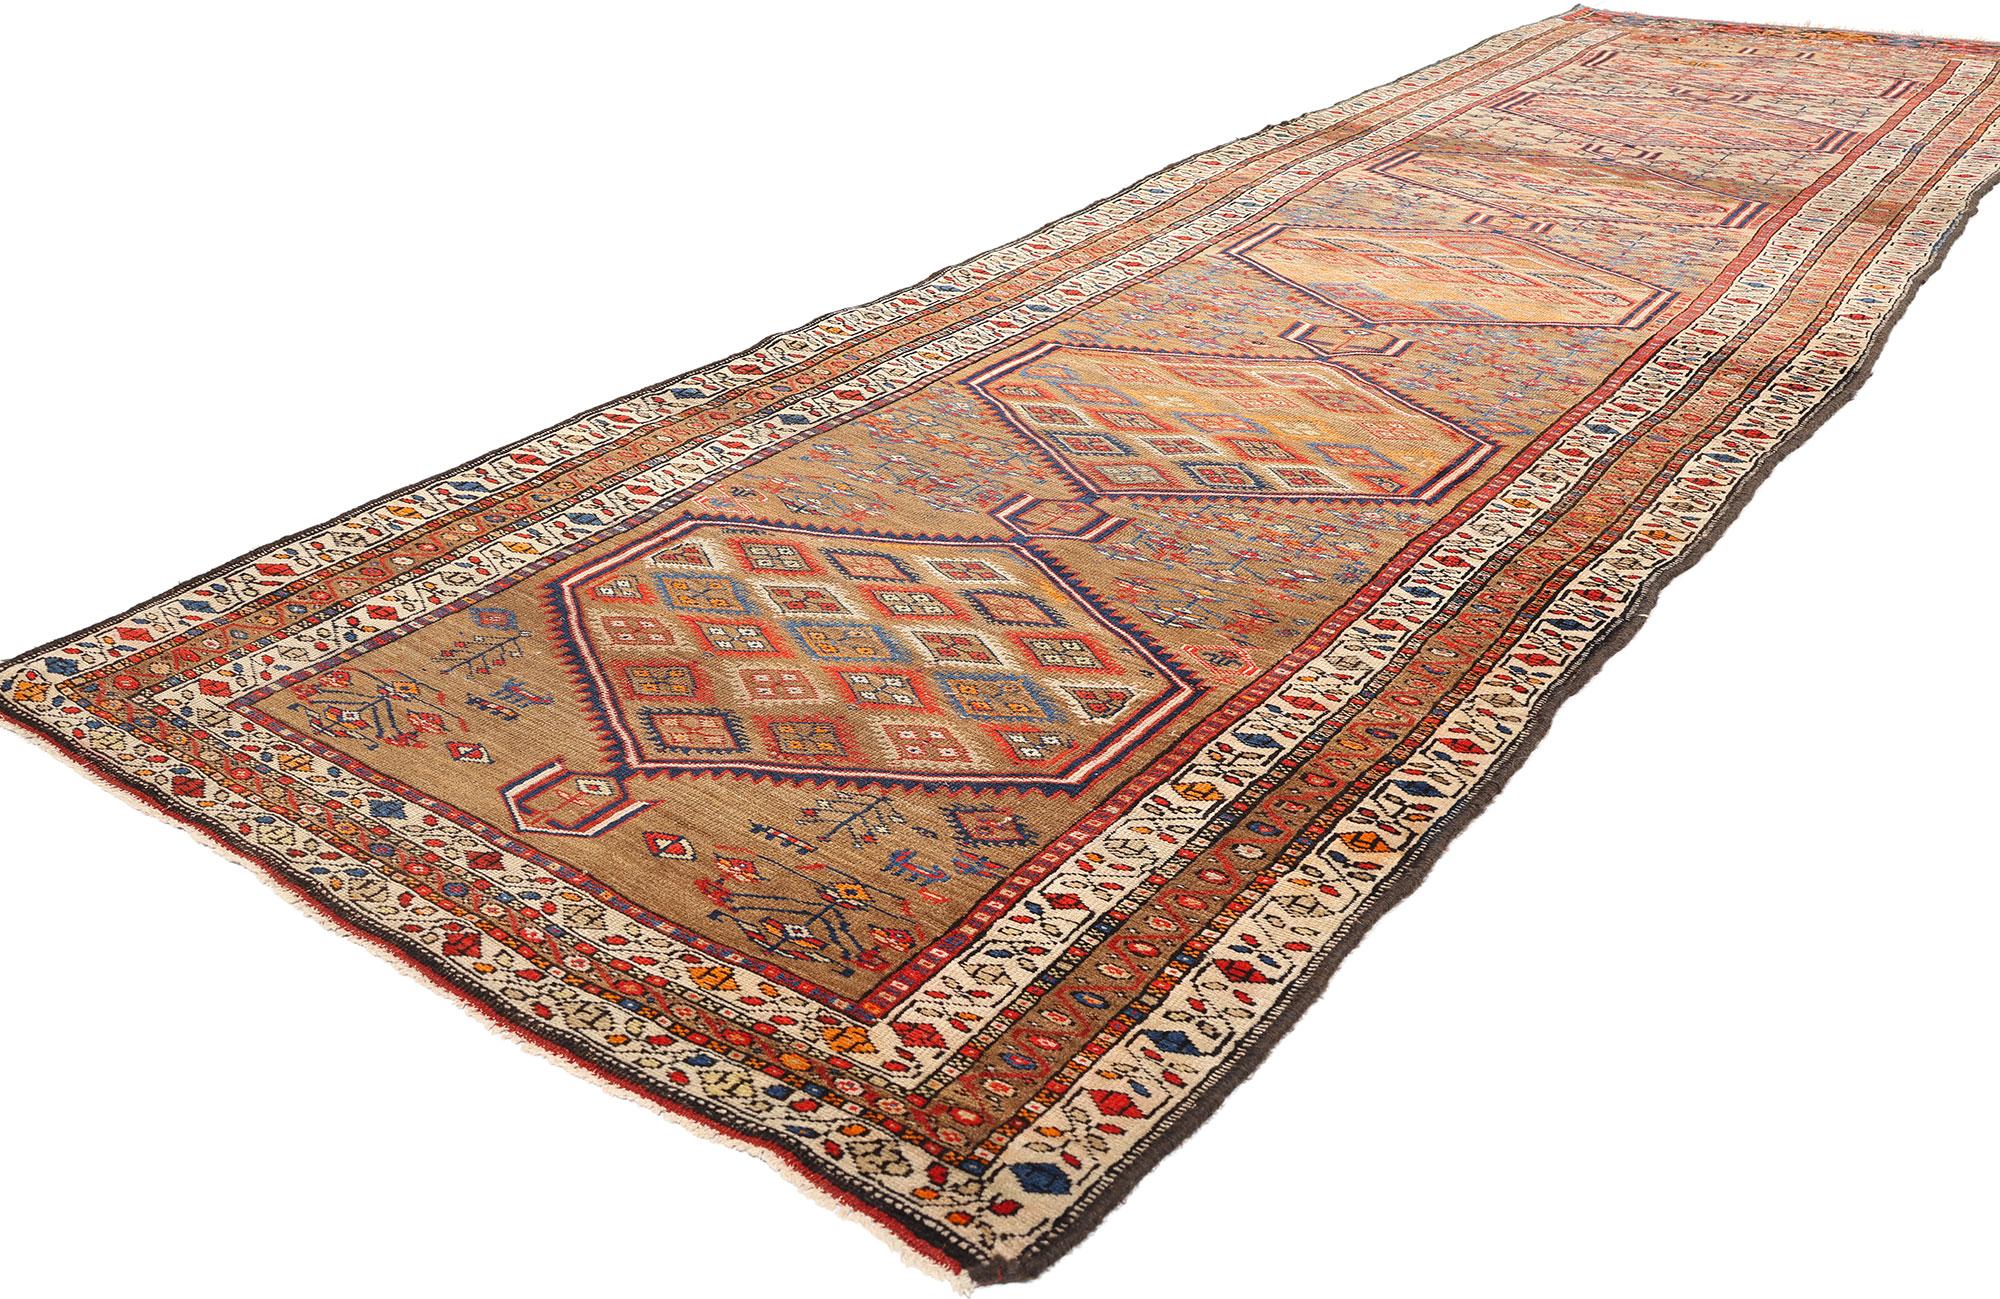 78773 Antique Persian Sarab Rug Runner, 04'01 x 15'01. Embodied in the mystical realm of Iran's northwest, Persian Sarab rugs and carpet runners are celebrated for their unrivaled artistry and tribal allure. Each Sarab rug, woven with the finest